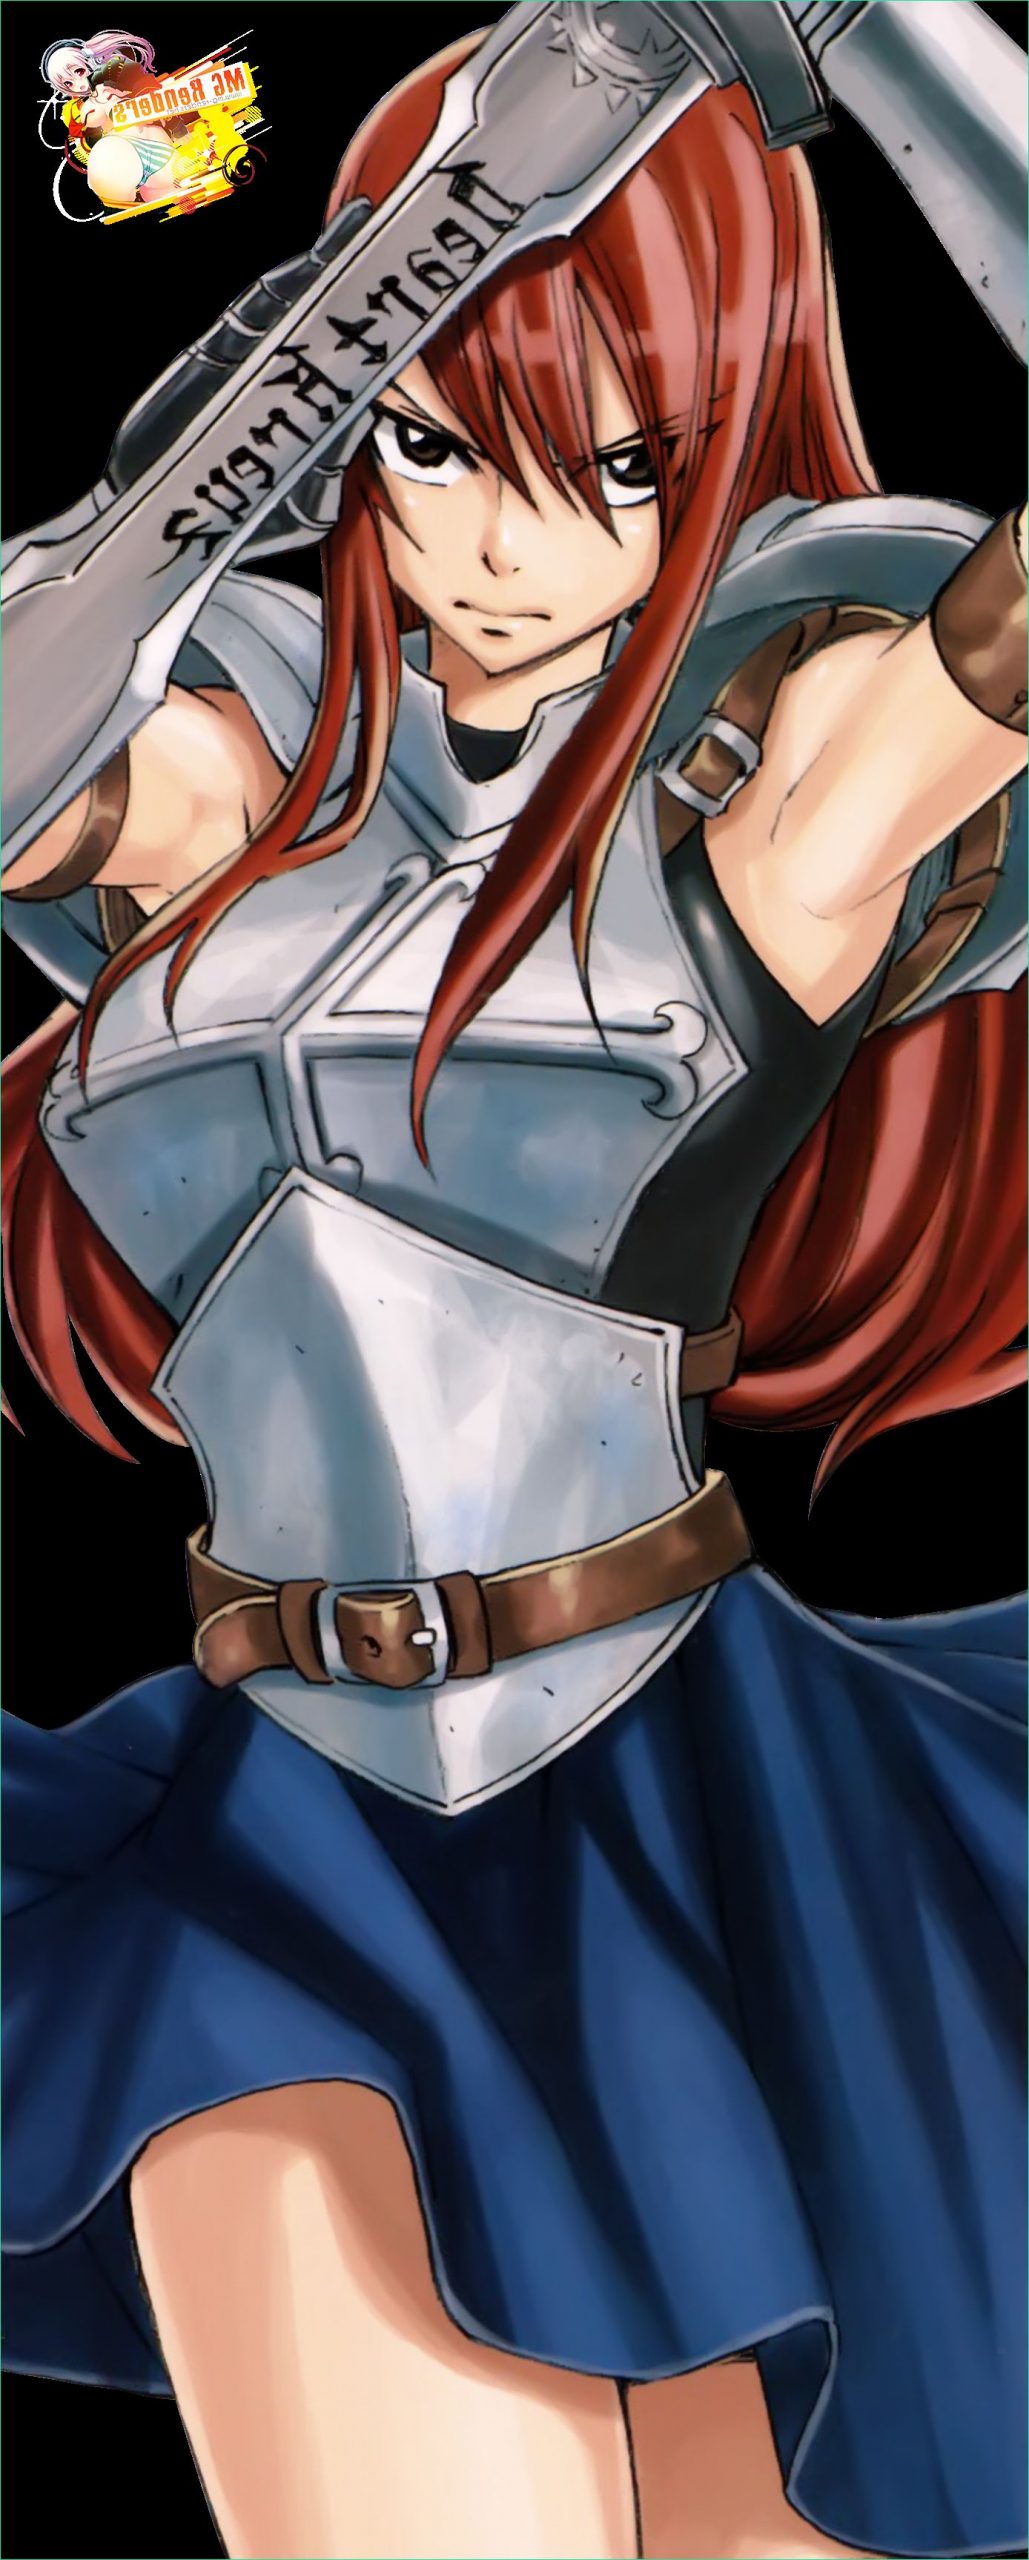 Fairy Tail Erza Impressionnant Photos Fairy Tail Erza Scarlet Render Anime Png Image without Background